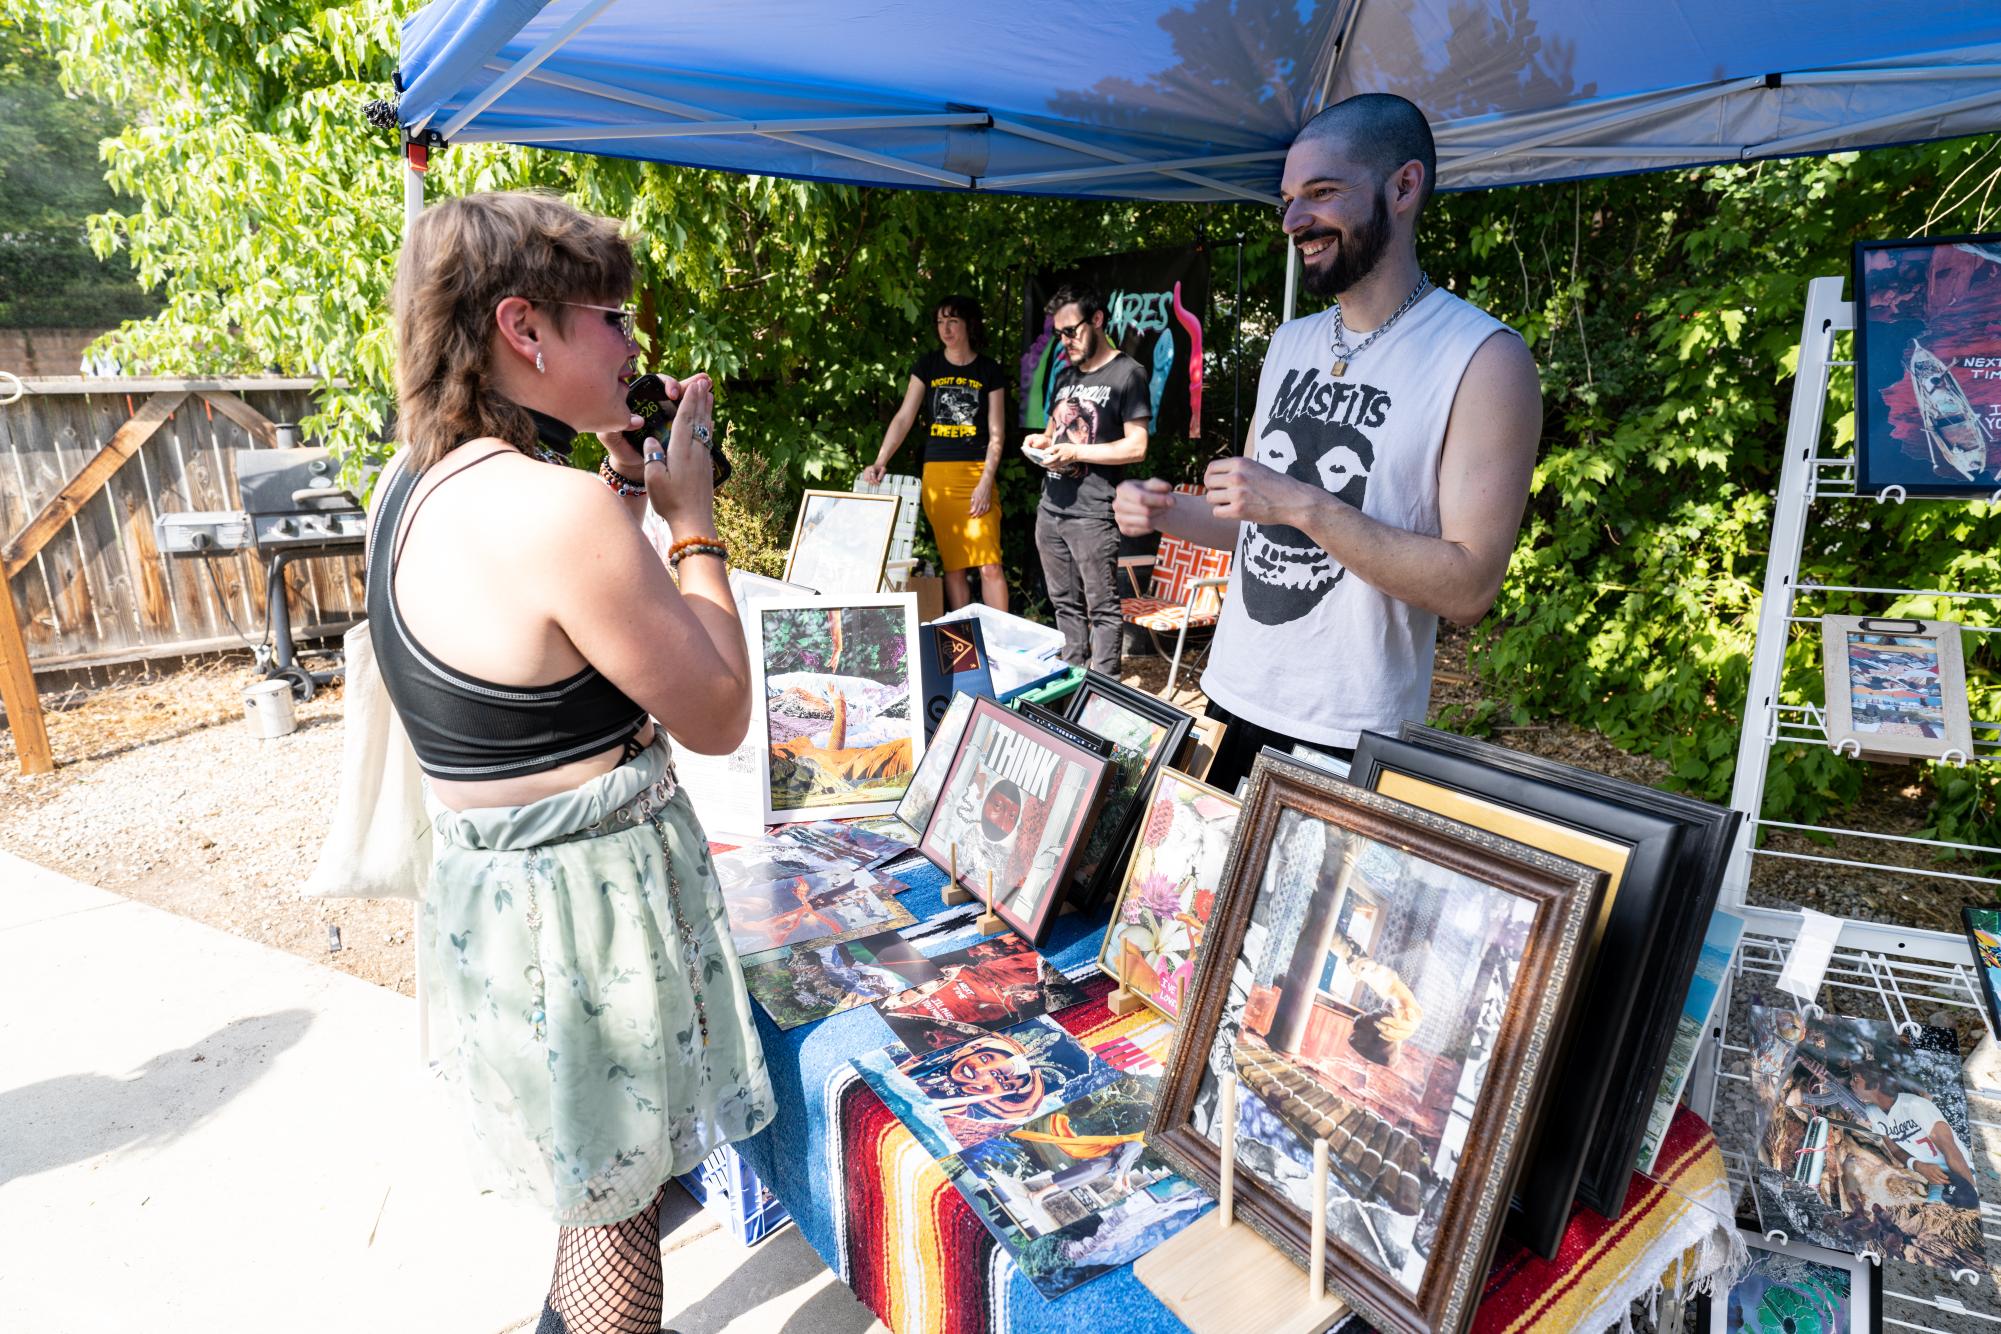 Cameron Lara talks to a customer at the SLC Punk Rock Flea Market at the Lost Acorn Gallery in Salt Lake City on July 30, 2023. (Photo by Xiangyao "Axe" Tang | The Daily Utah Chronicle)